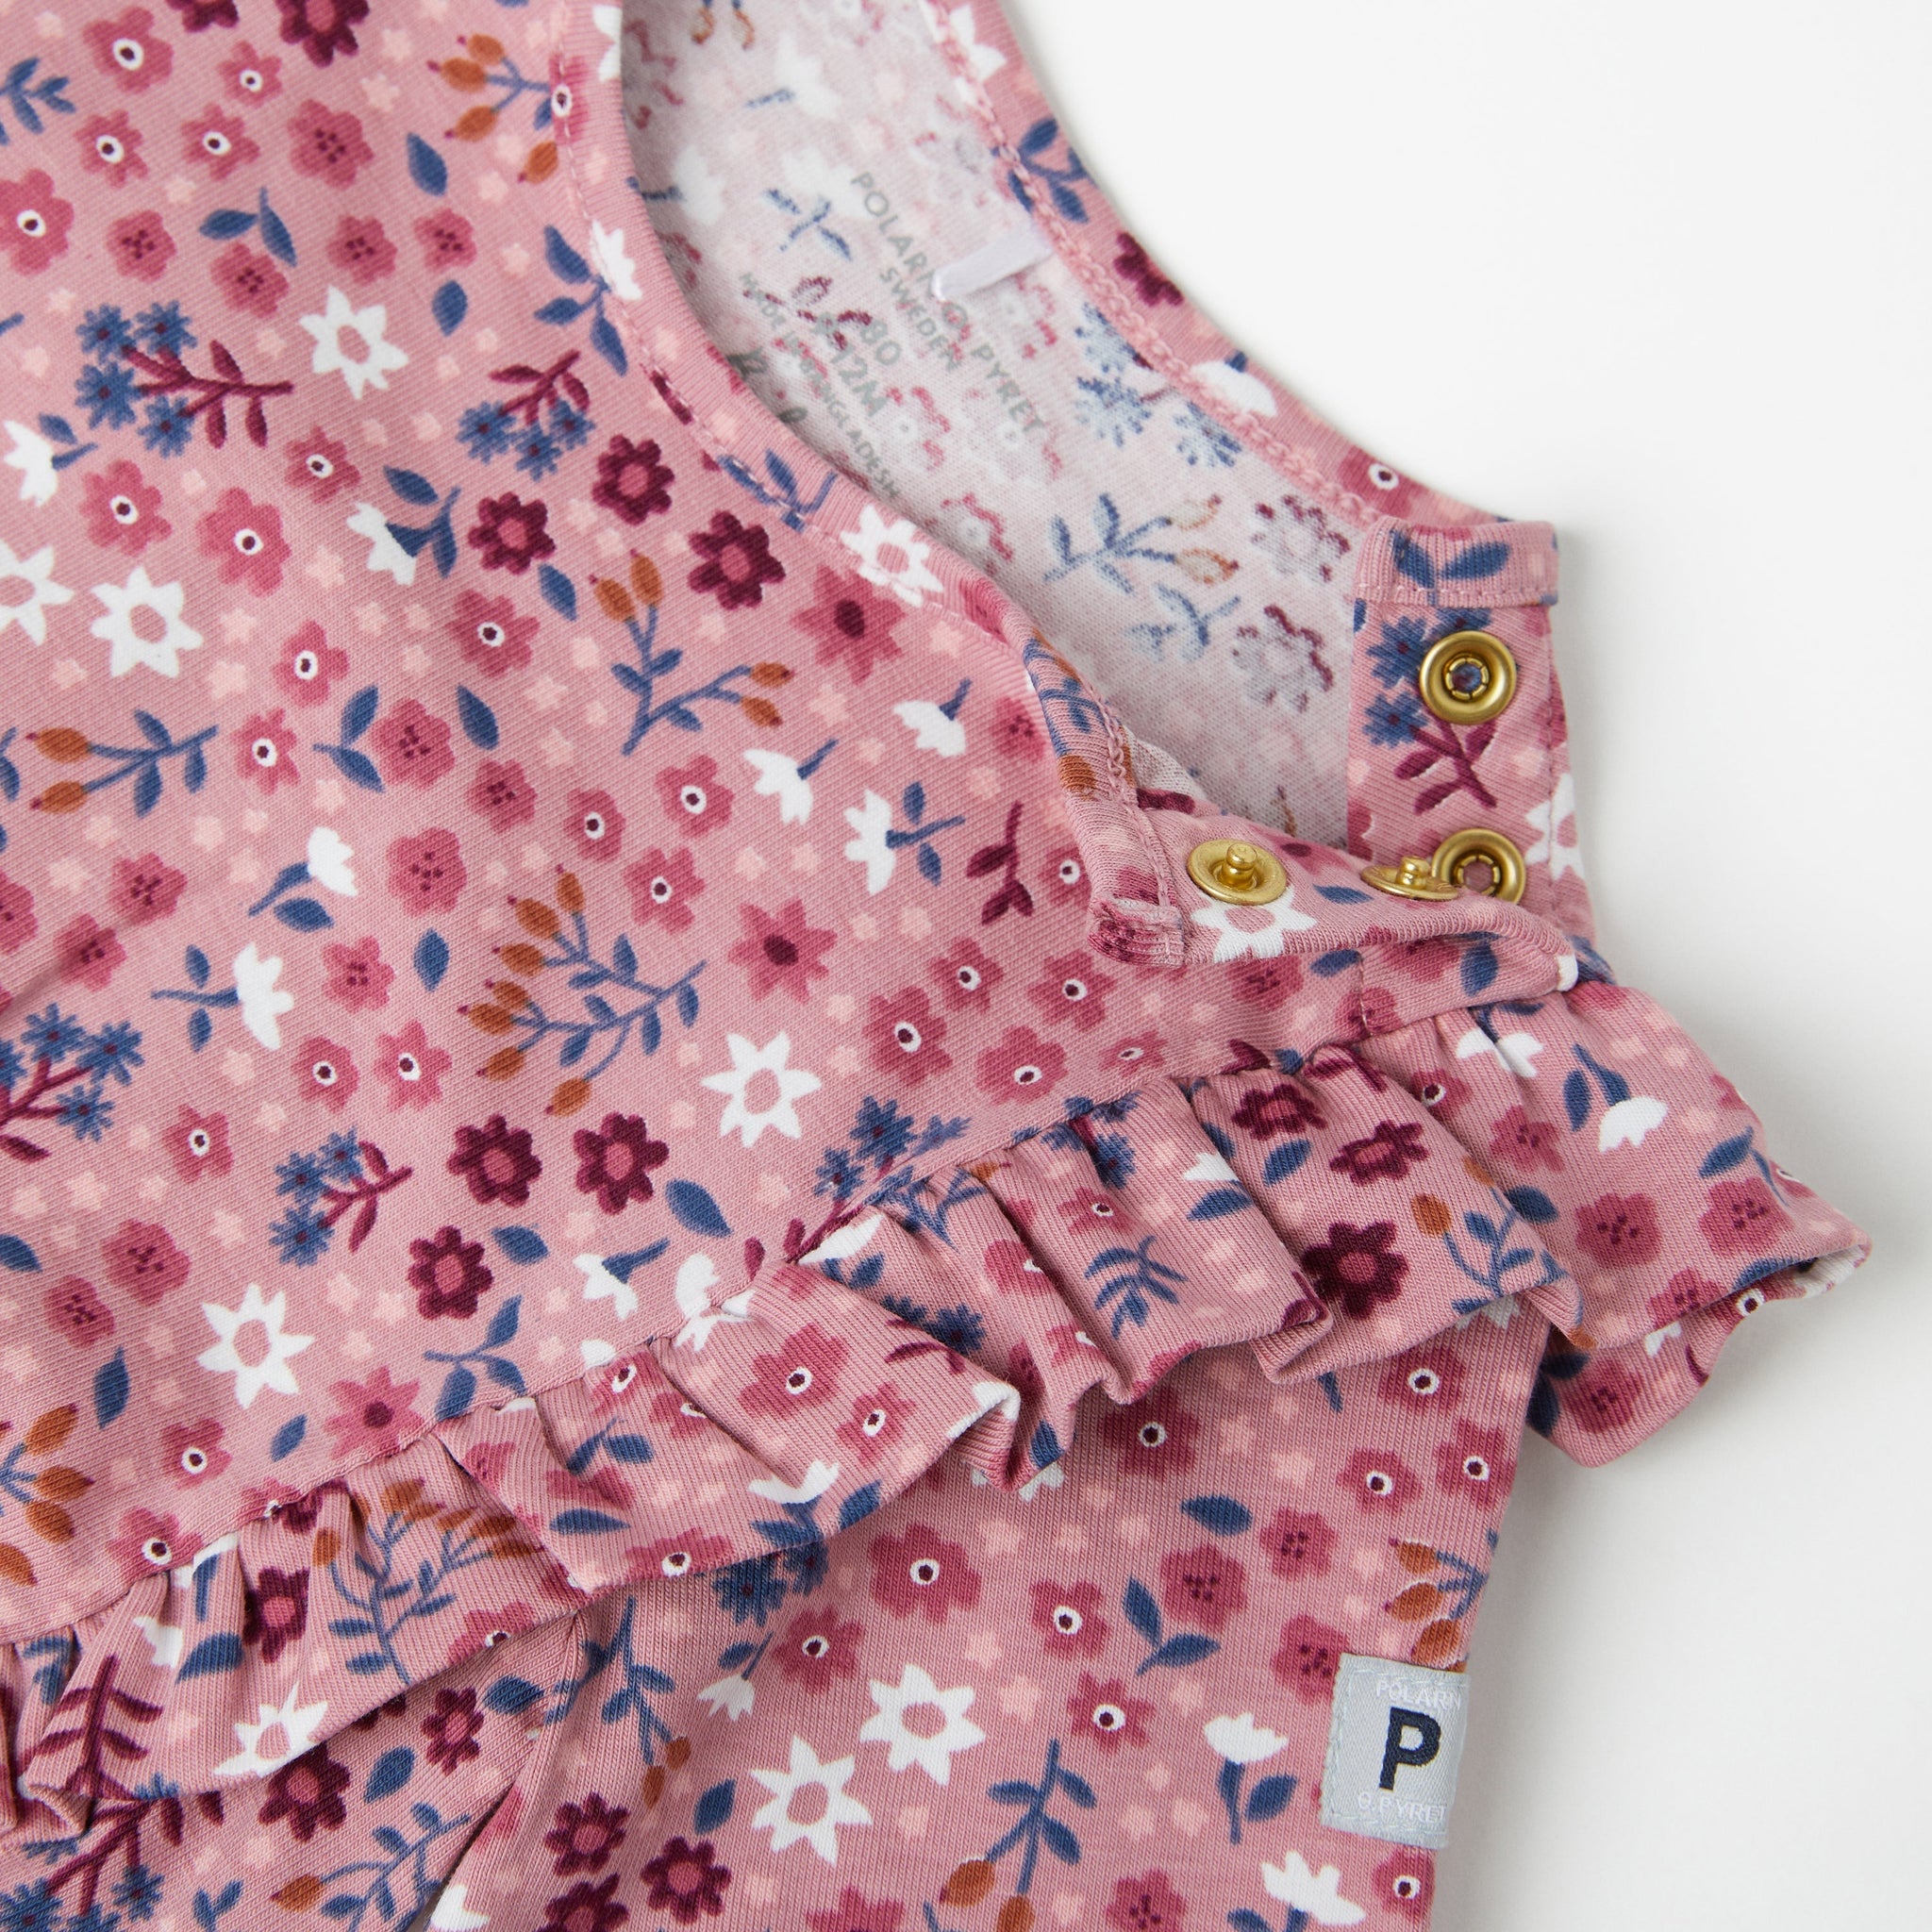 Pink Floral Newborn Babygrow from the Polarn O. Pyret Kidswear collection. Ethically produced kids clothing.